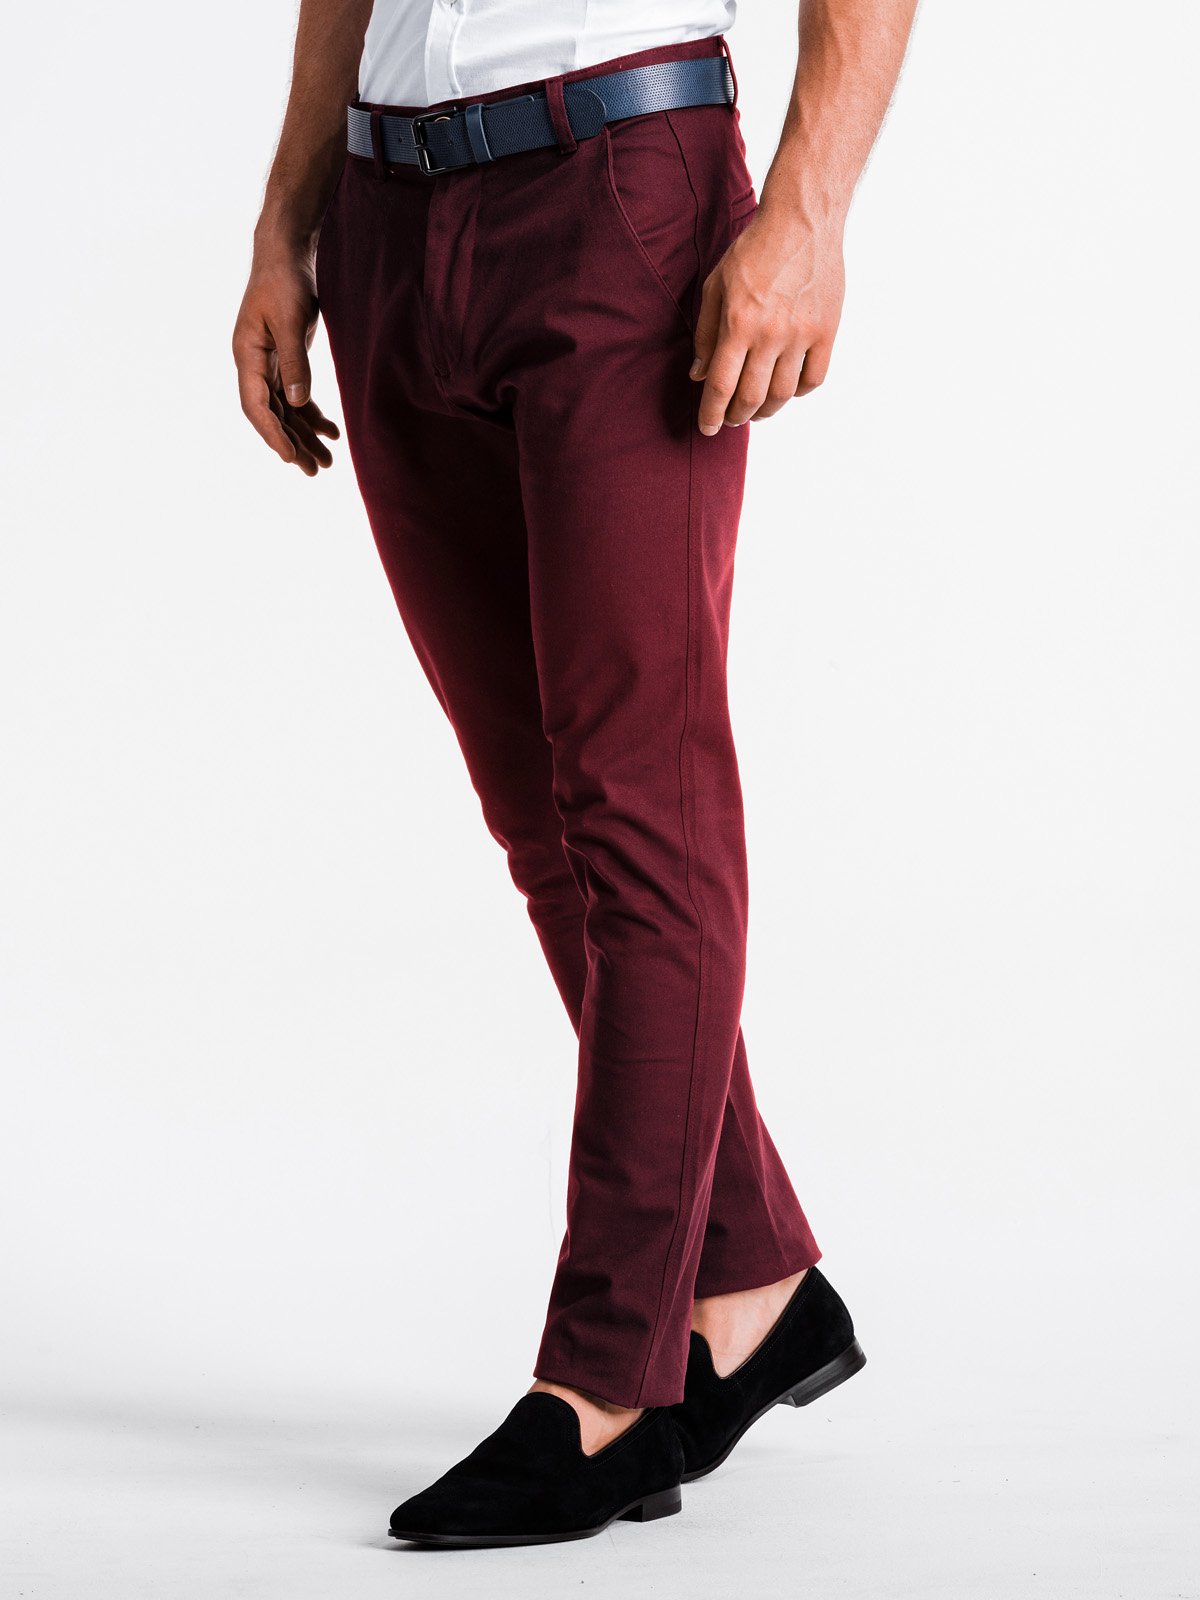 Men's pants chinos P830 - dark red | MODONE wholesale - Clothing For Men